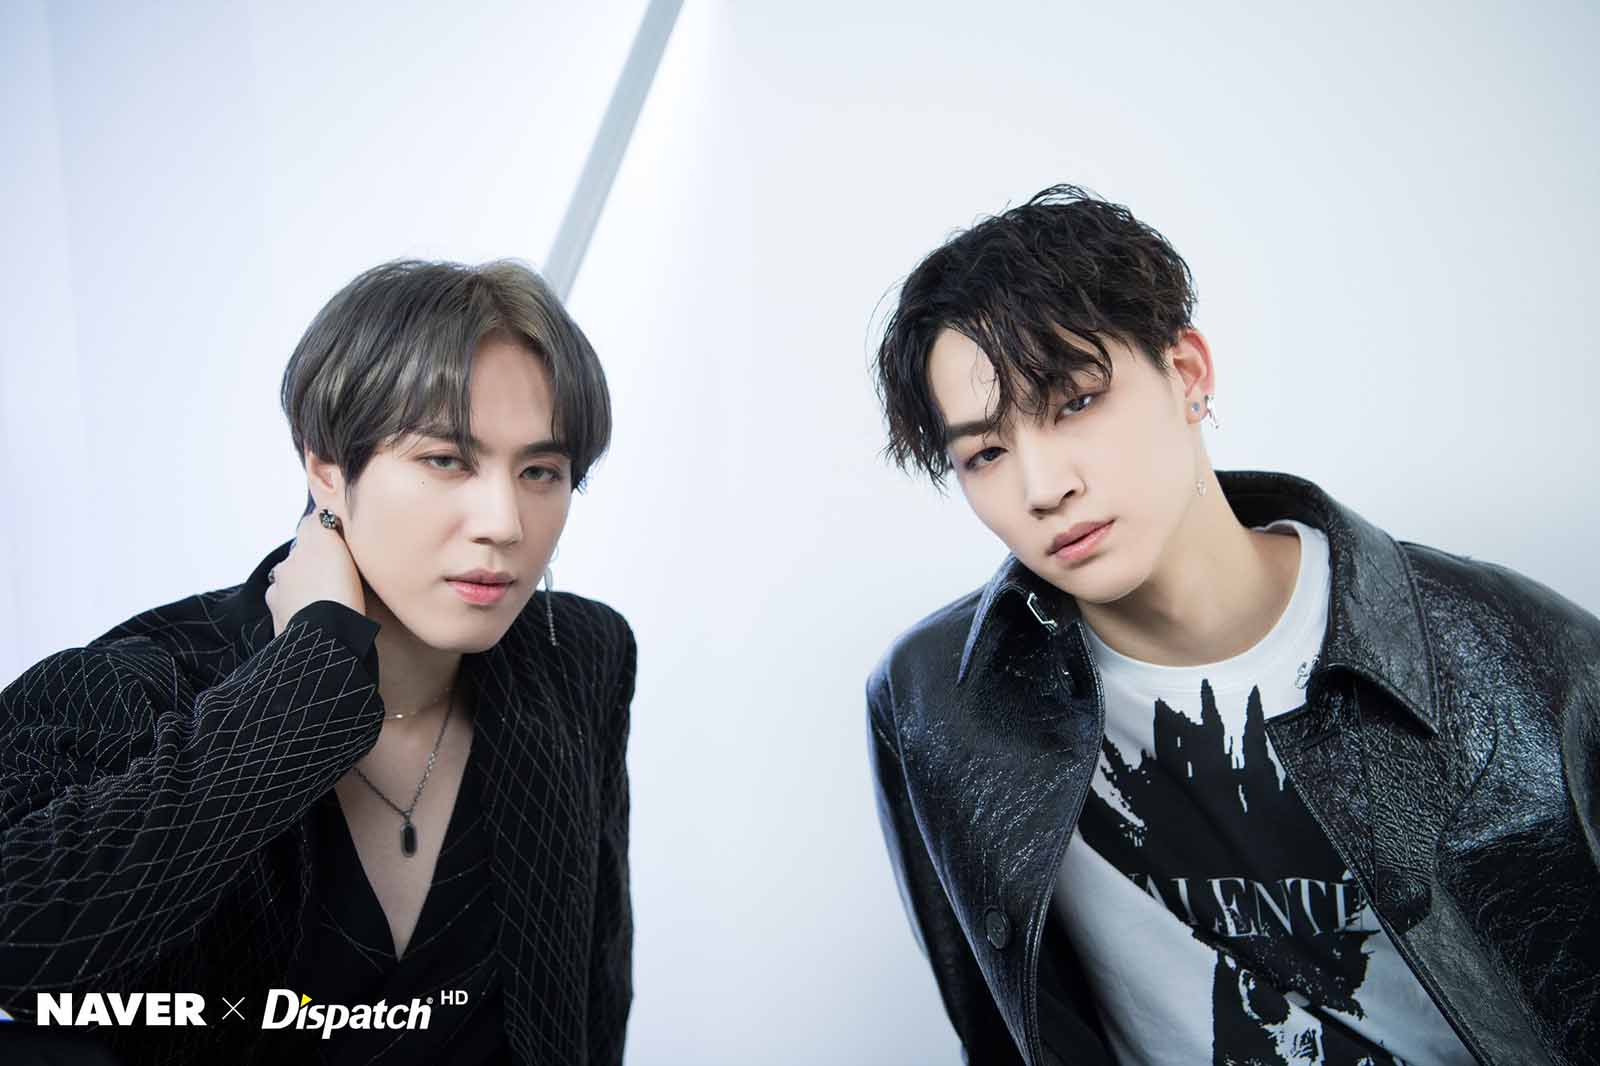 JB may be the leader of GOT7, but that's far from the only thing he's done. Learn about all the subunits and other groups JB has performed with.